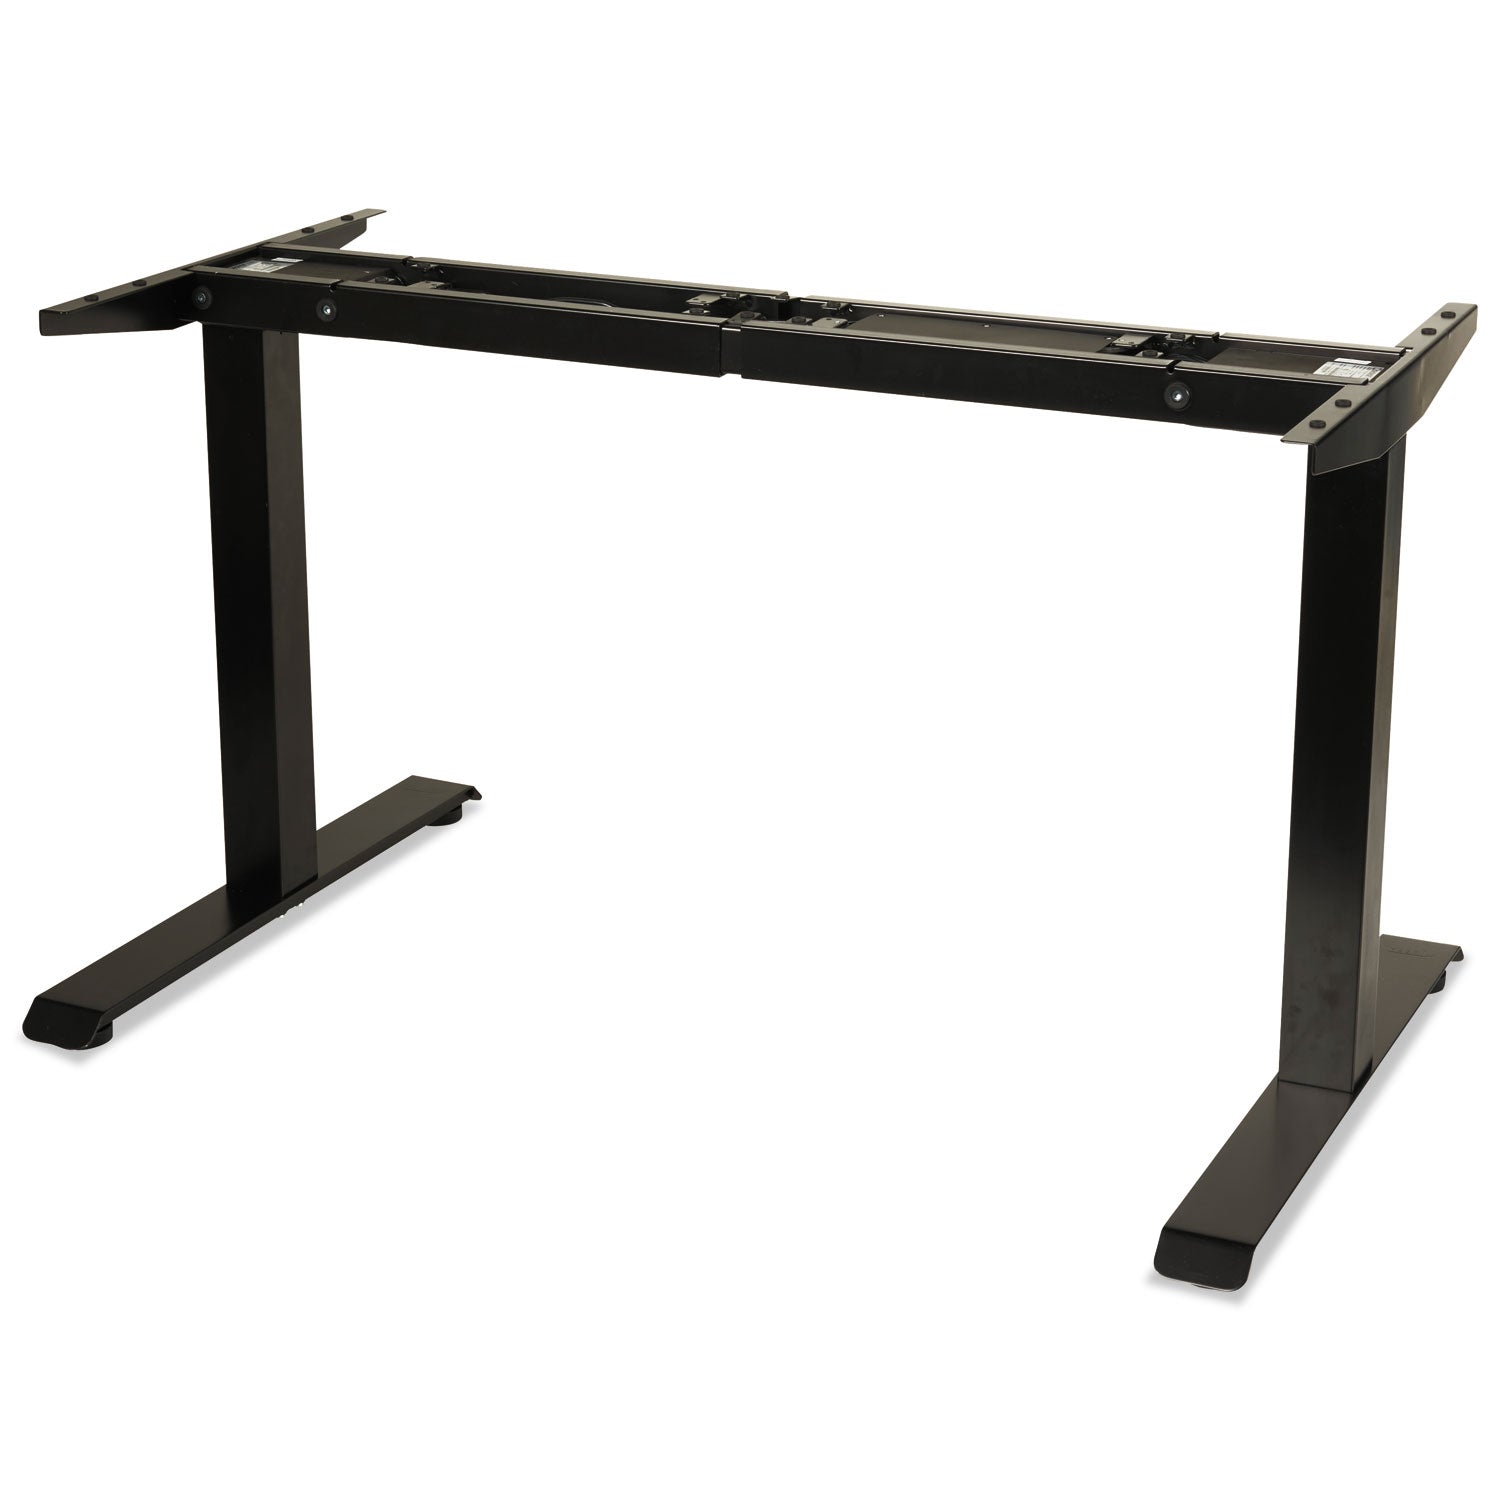 adaptivergo-sit-stand-two-stage-electric-height-adjustable-table-base-4806-x-2435-x-275-to-472-black_aleht2ssb - 4